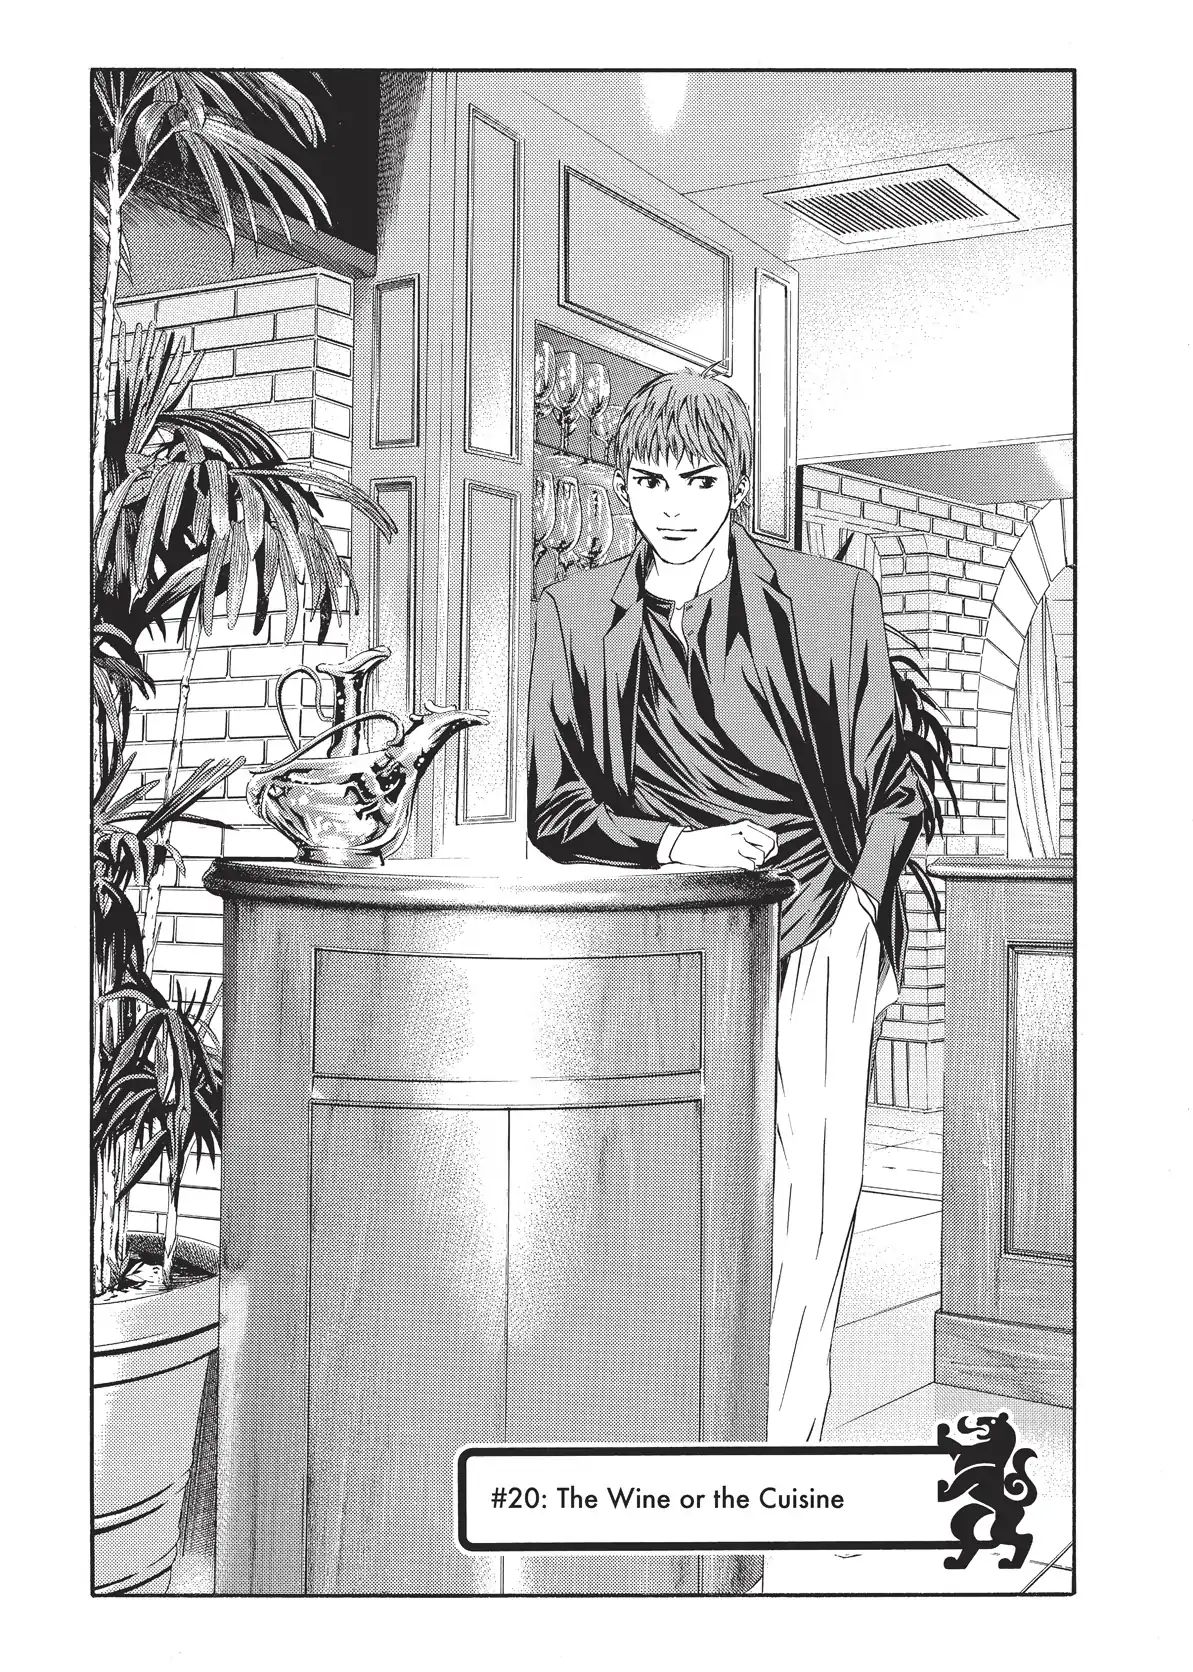 Kami No Shizuku Vol.2 Chapter 20: The Wine Or The Cuisine - Picture 1